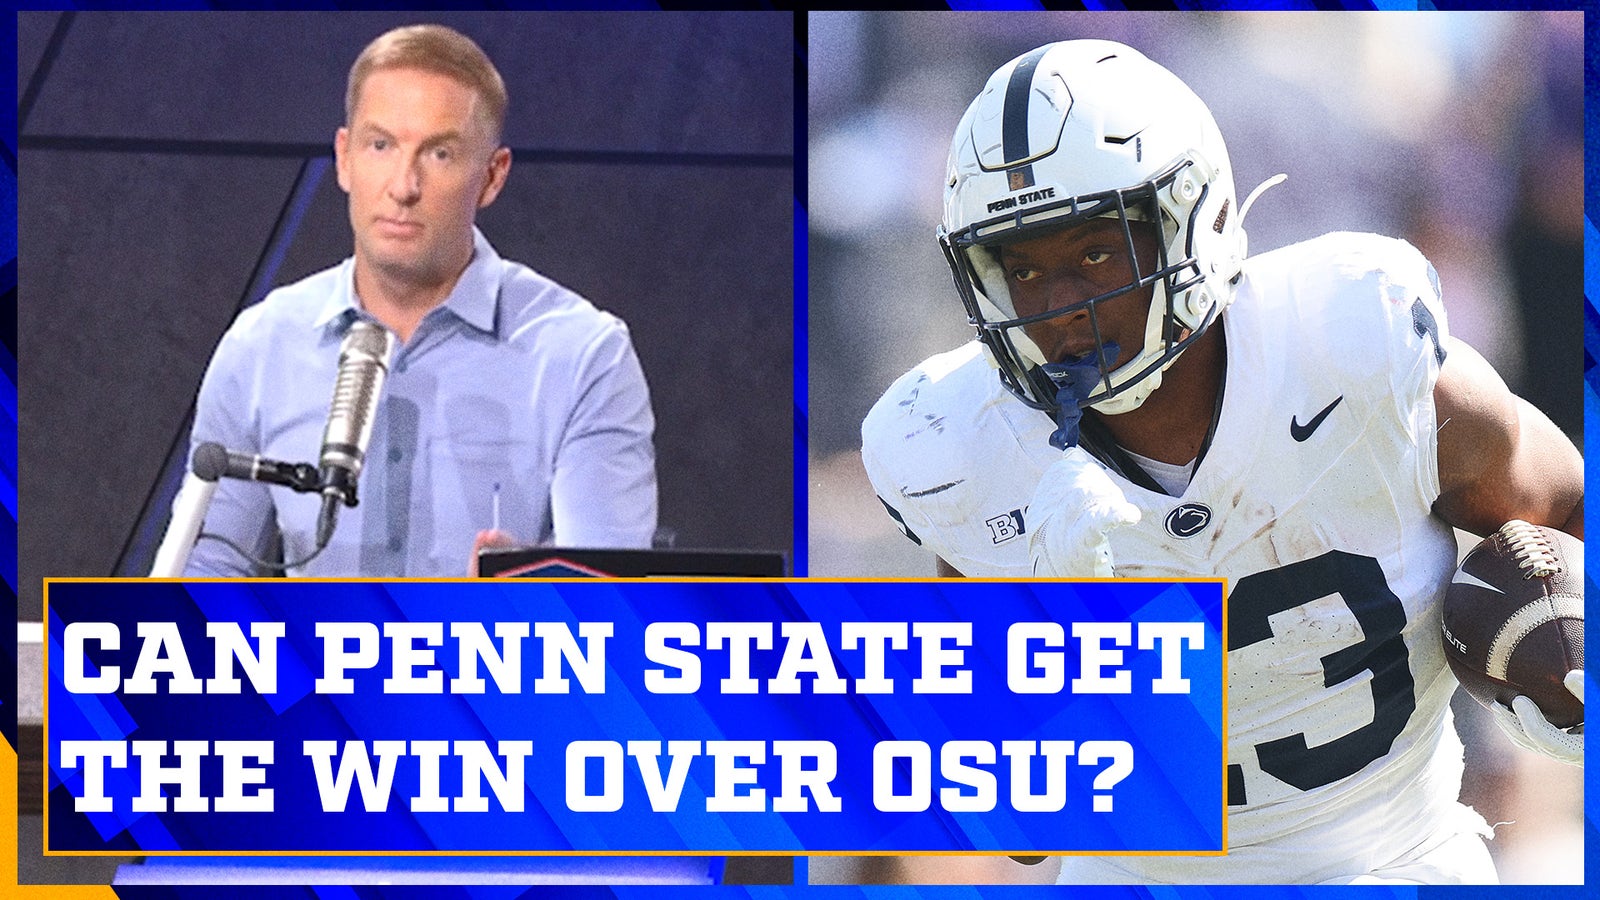 Will Penn State give Ohio State a challenge in The Shoe? 